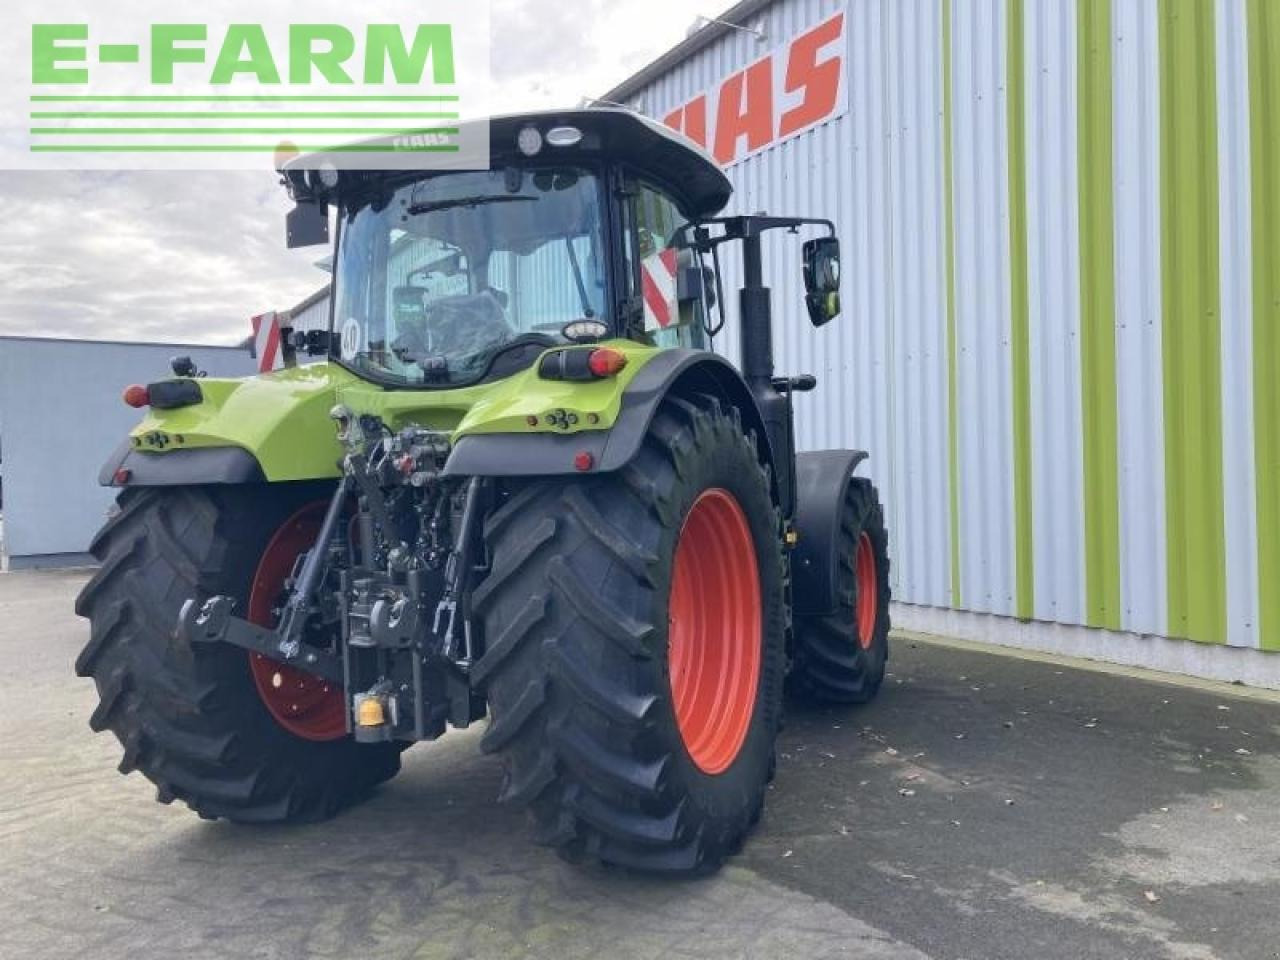 Farm tractor CLAAS arion 650 st4 cmatic